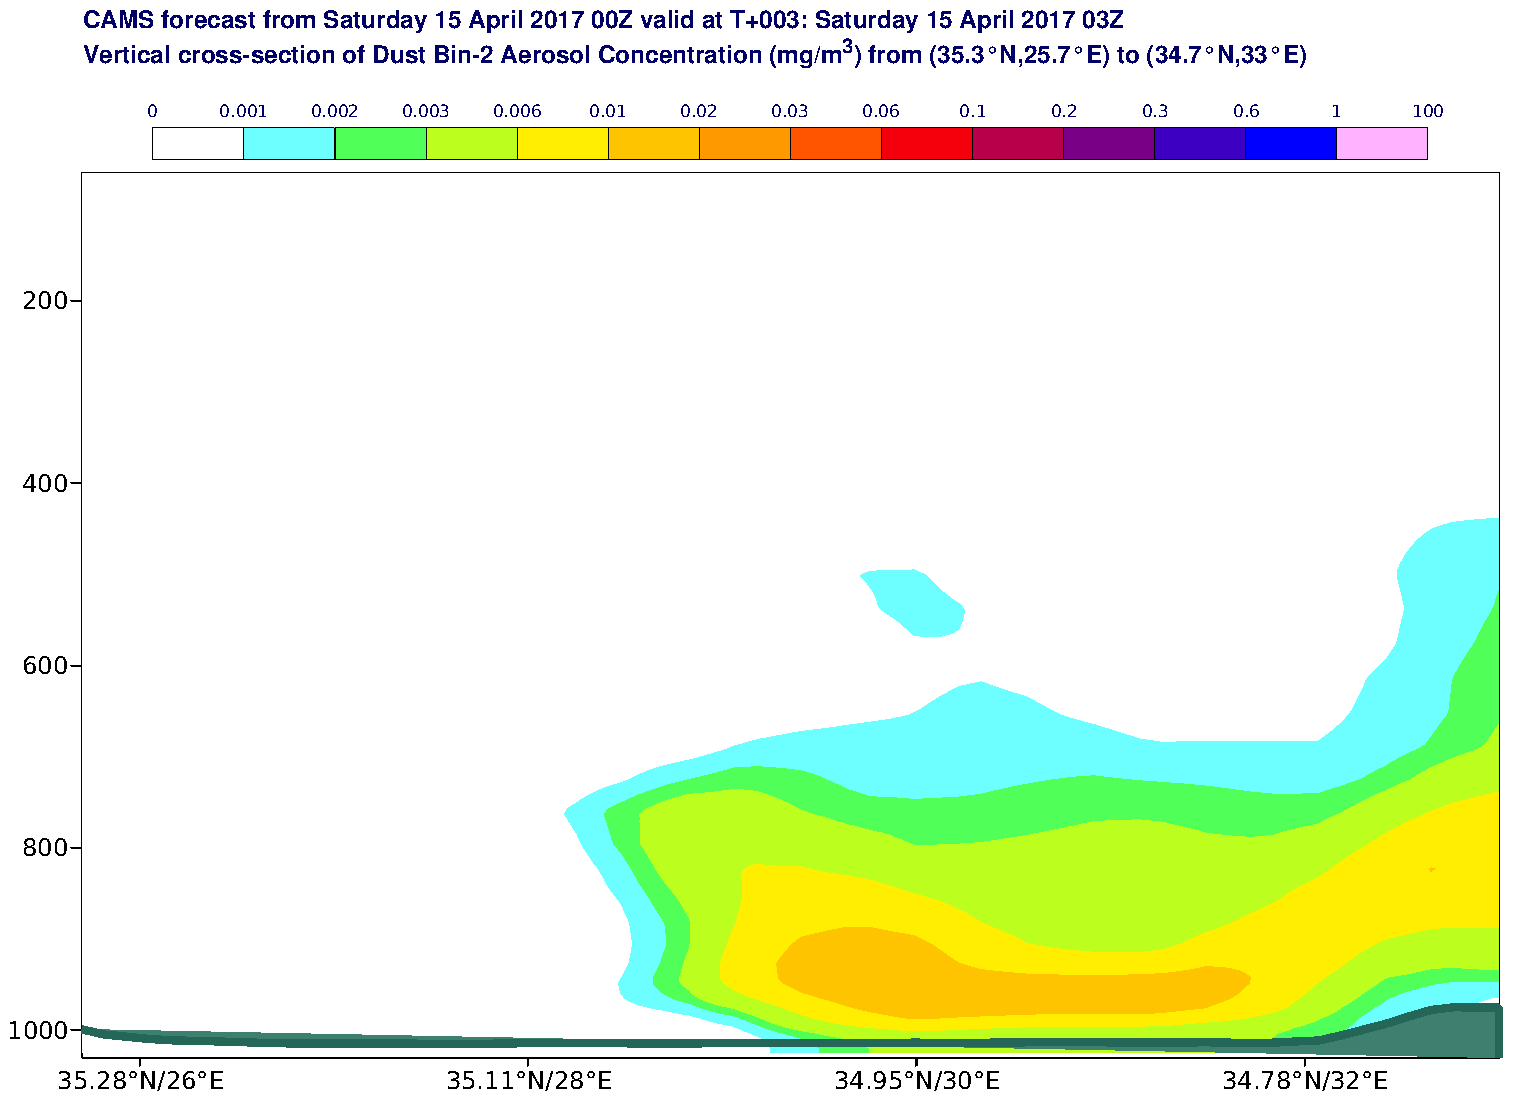 Vertical cross-section of Dust Bin-2 Aerosol Concentration (mg/m3) valid at T3 - 2017-04-15 03:00